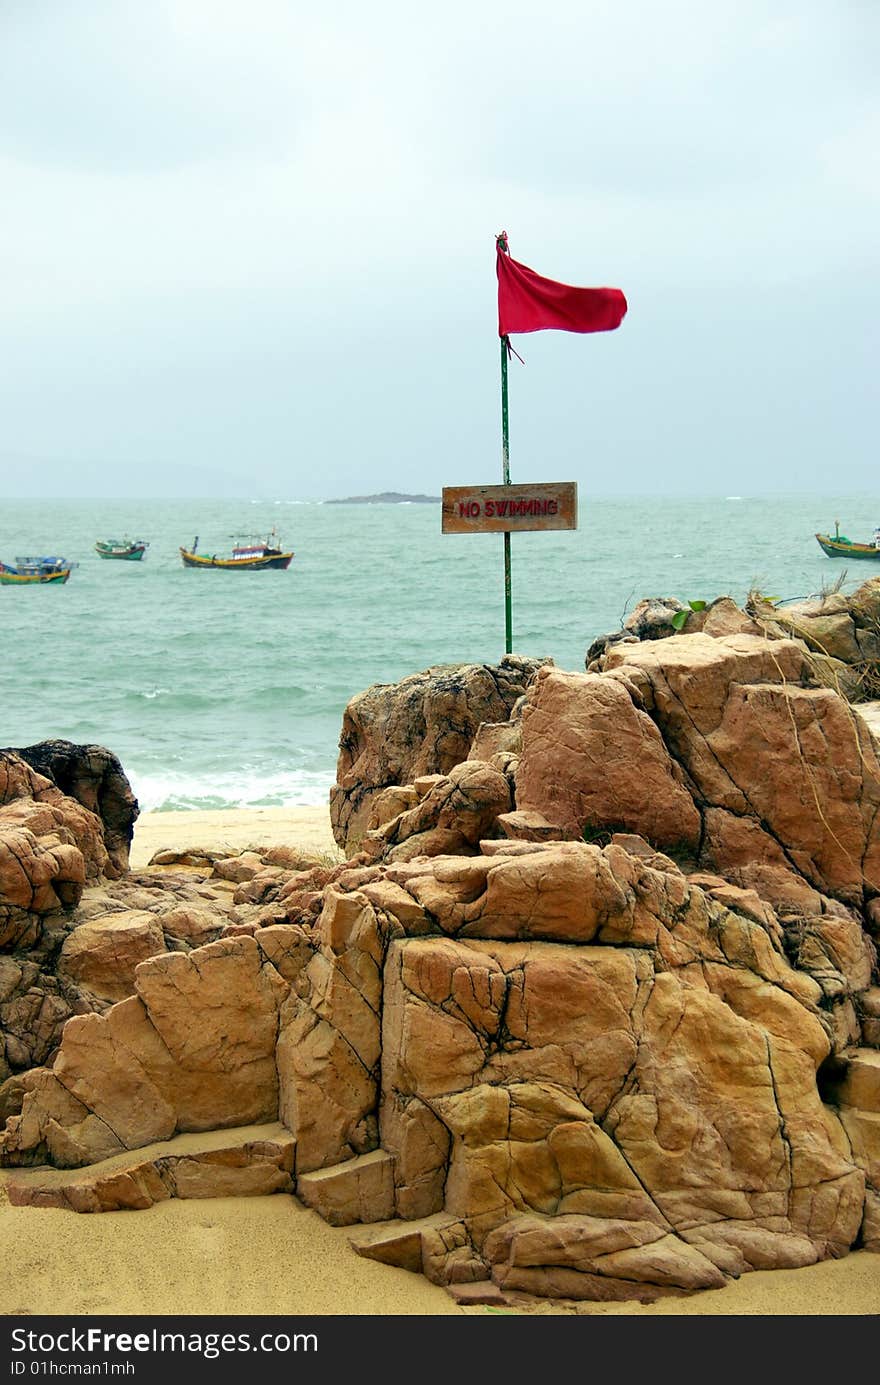 The red flag at a beach in Vietnam